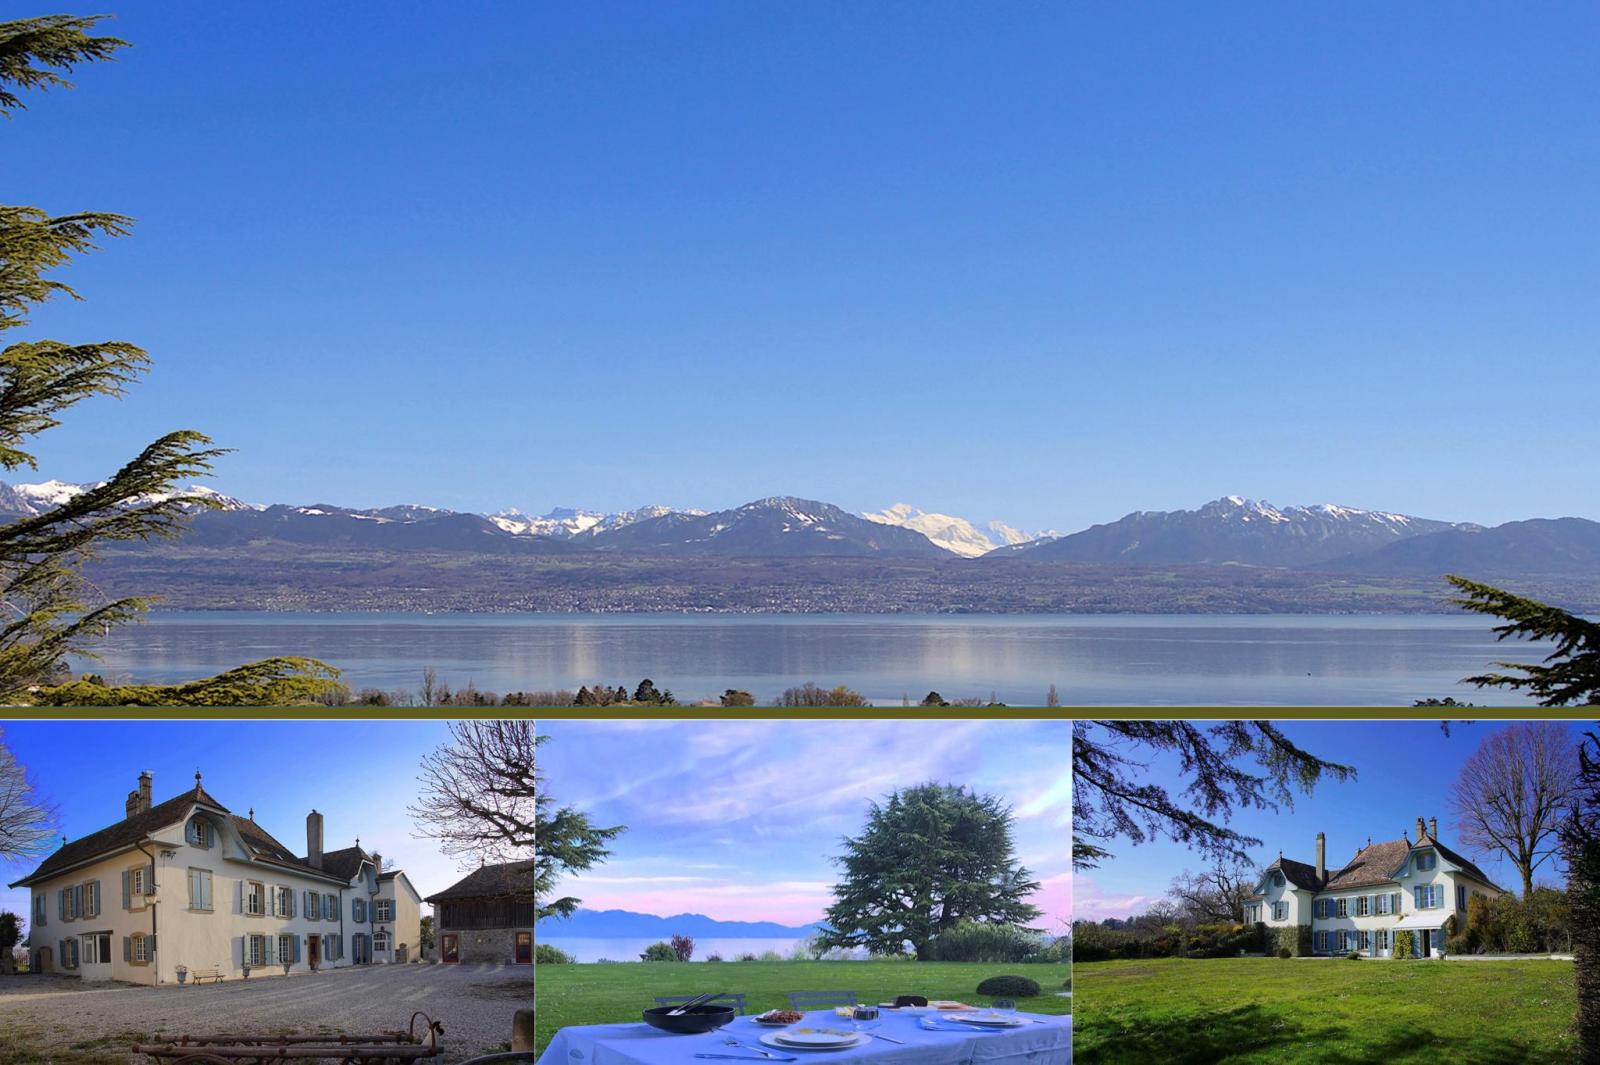 21,000 M2 ESTATE WITH LAKE VIEWS AND THREE INDEPENDENT DWELLINGS